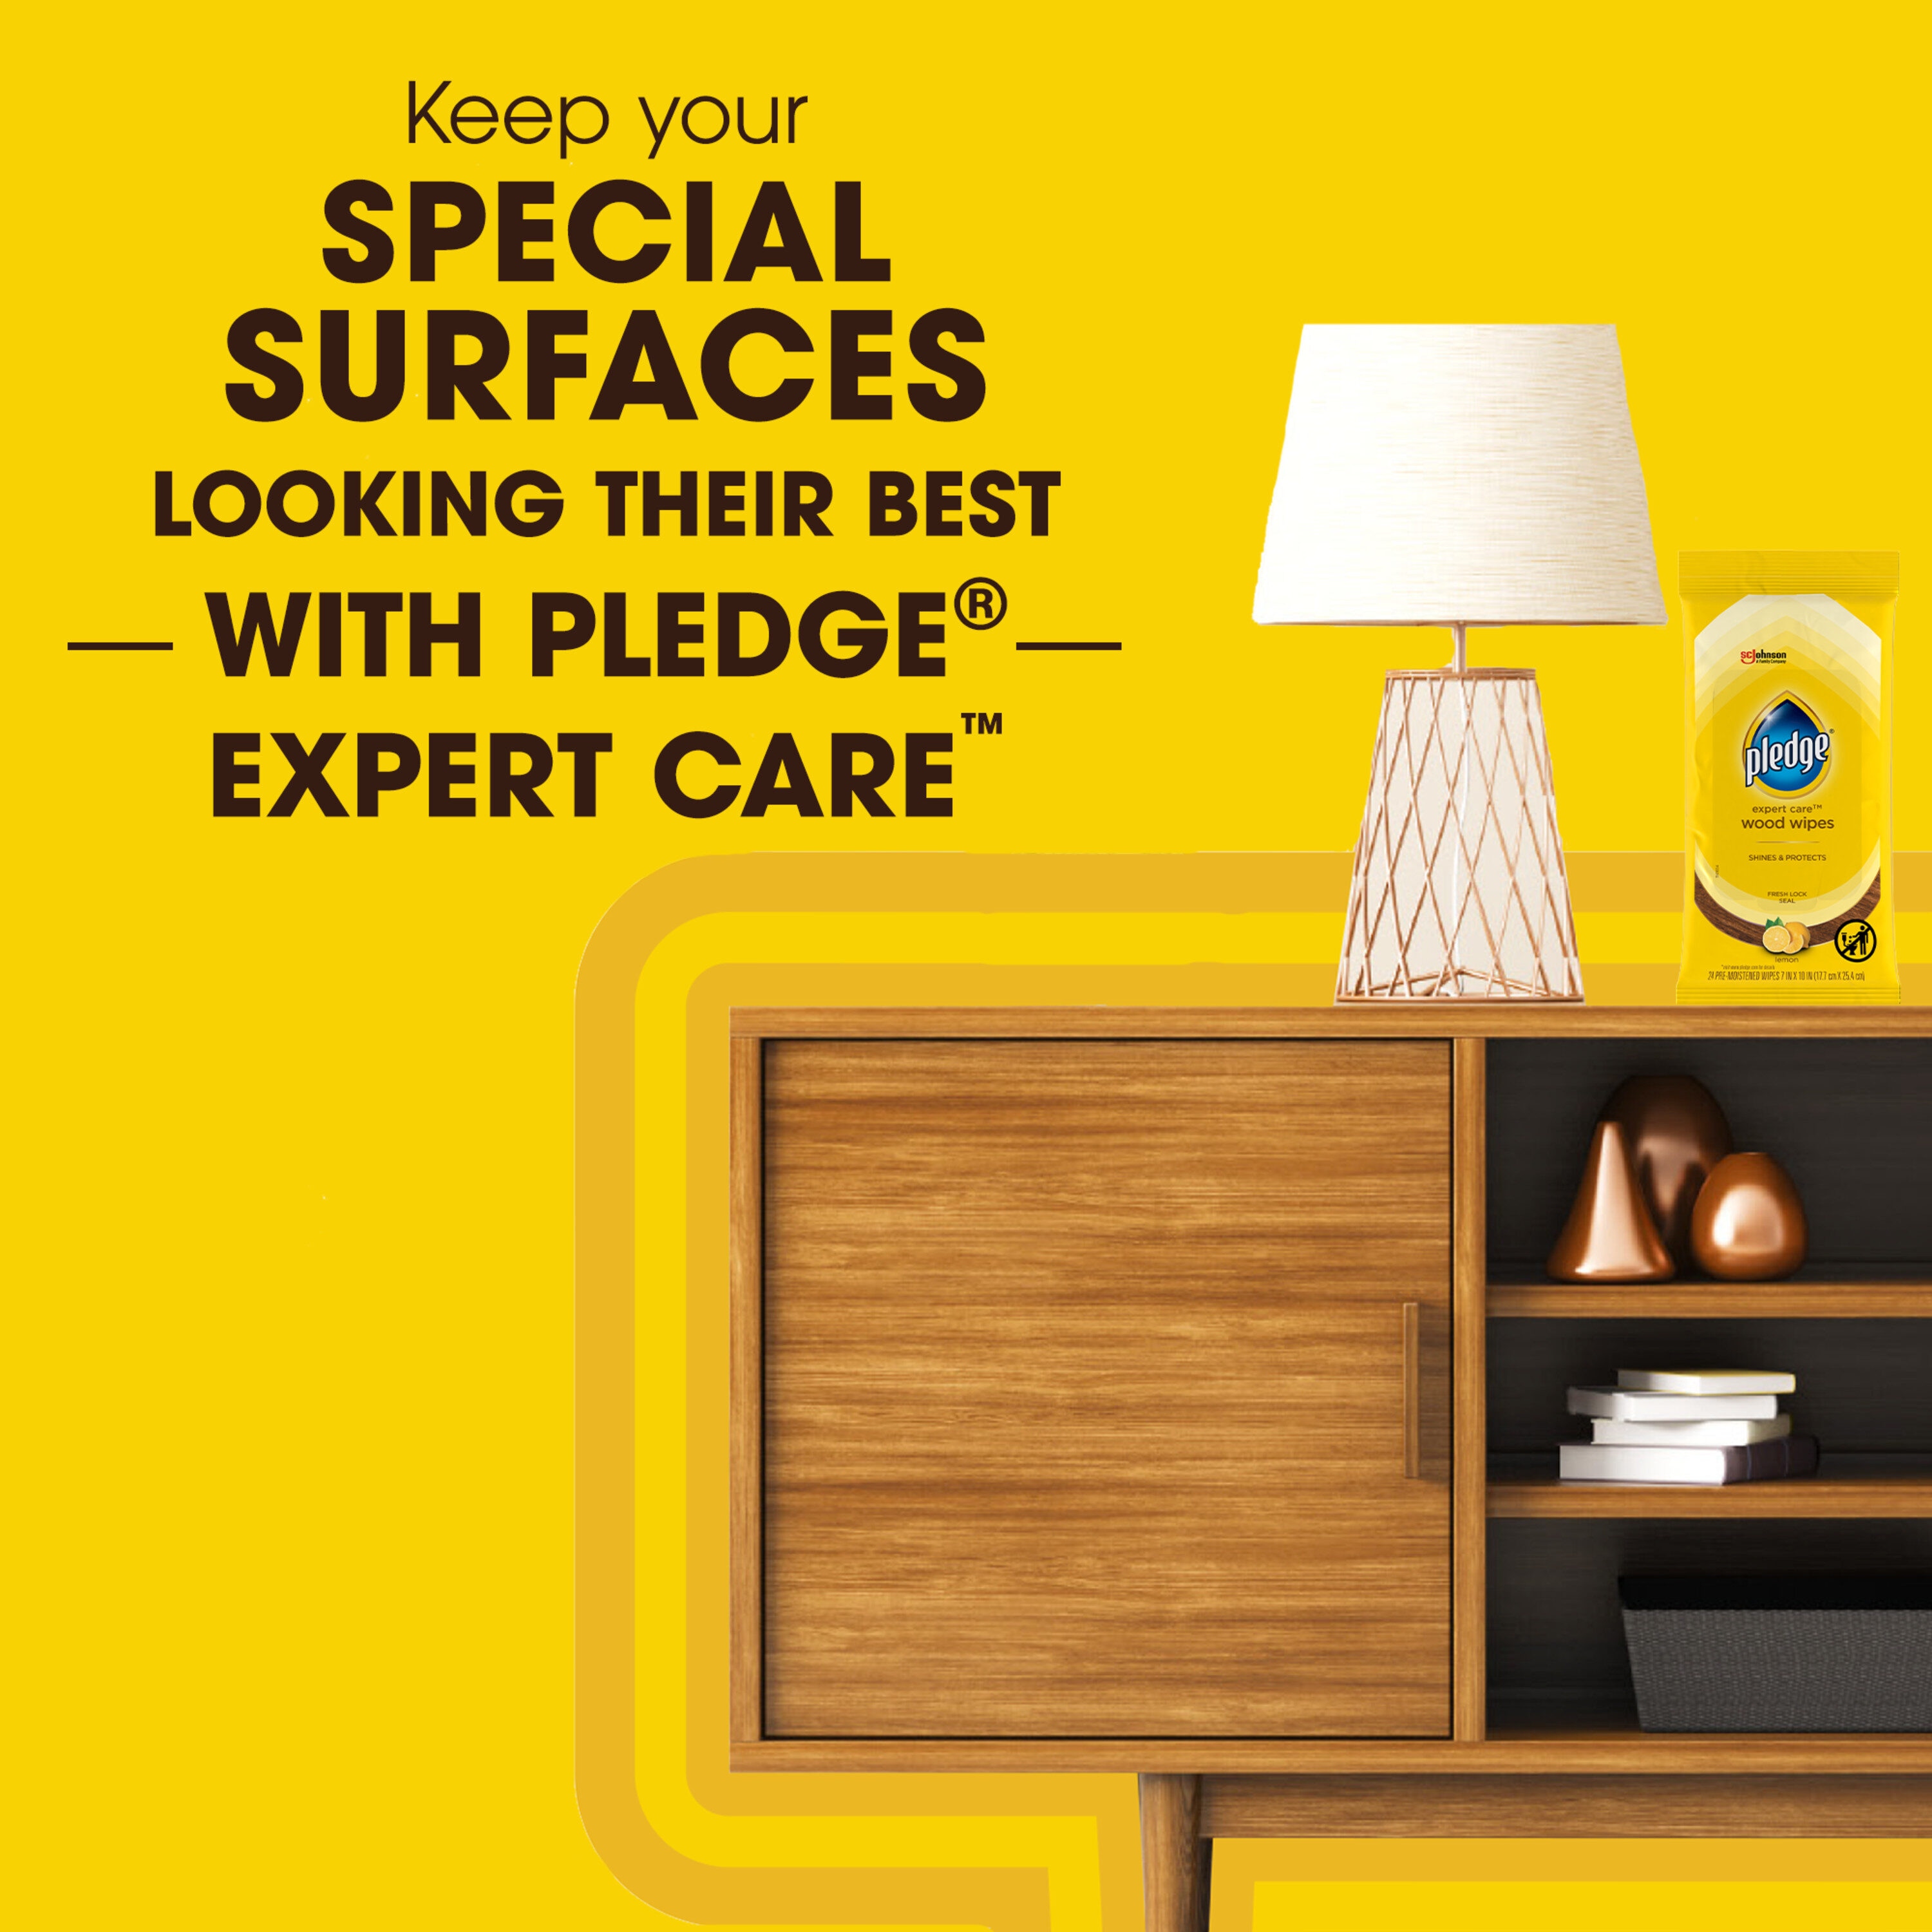 Pledge Multi-Surface Furniture Polish Wipes, Works On Wood, Granite, And  Leather, Cleans And Protects, Fresh Citrus - Pack Of 6 (150 Total Wipes)